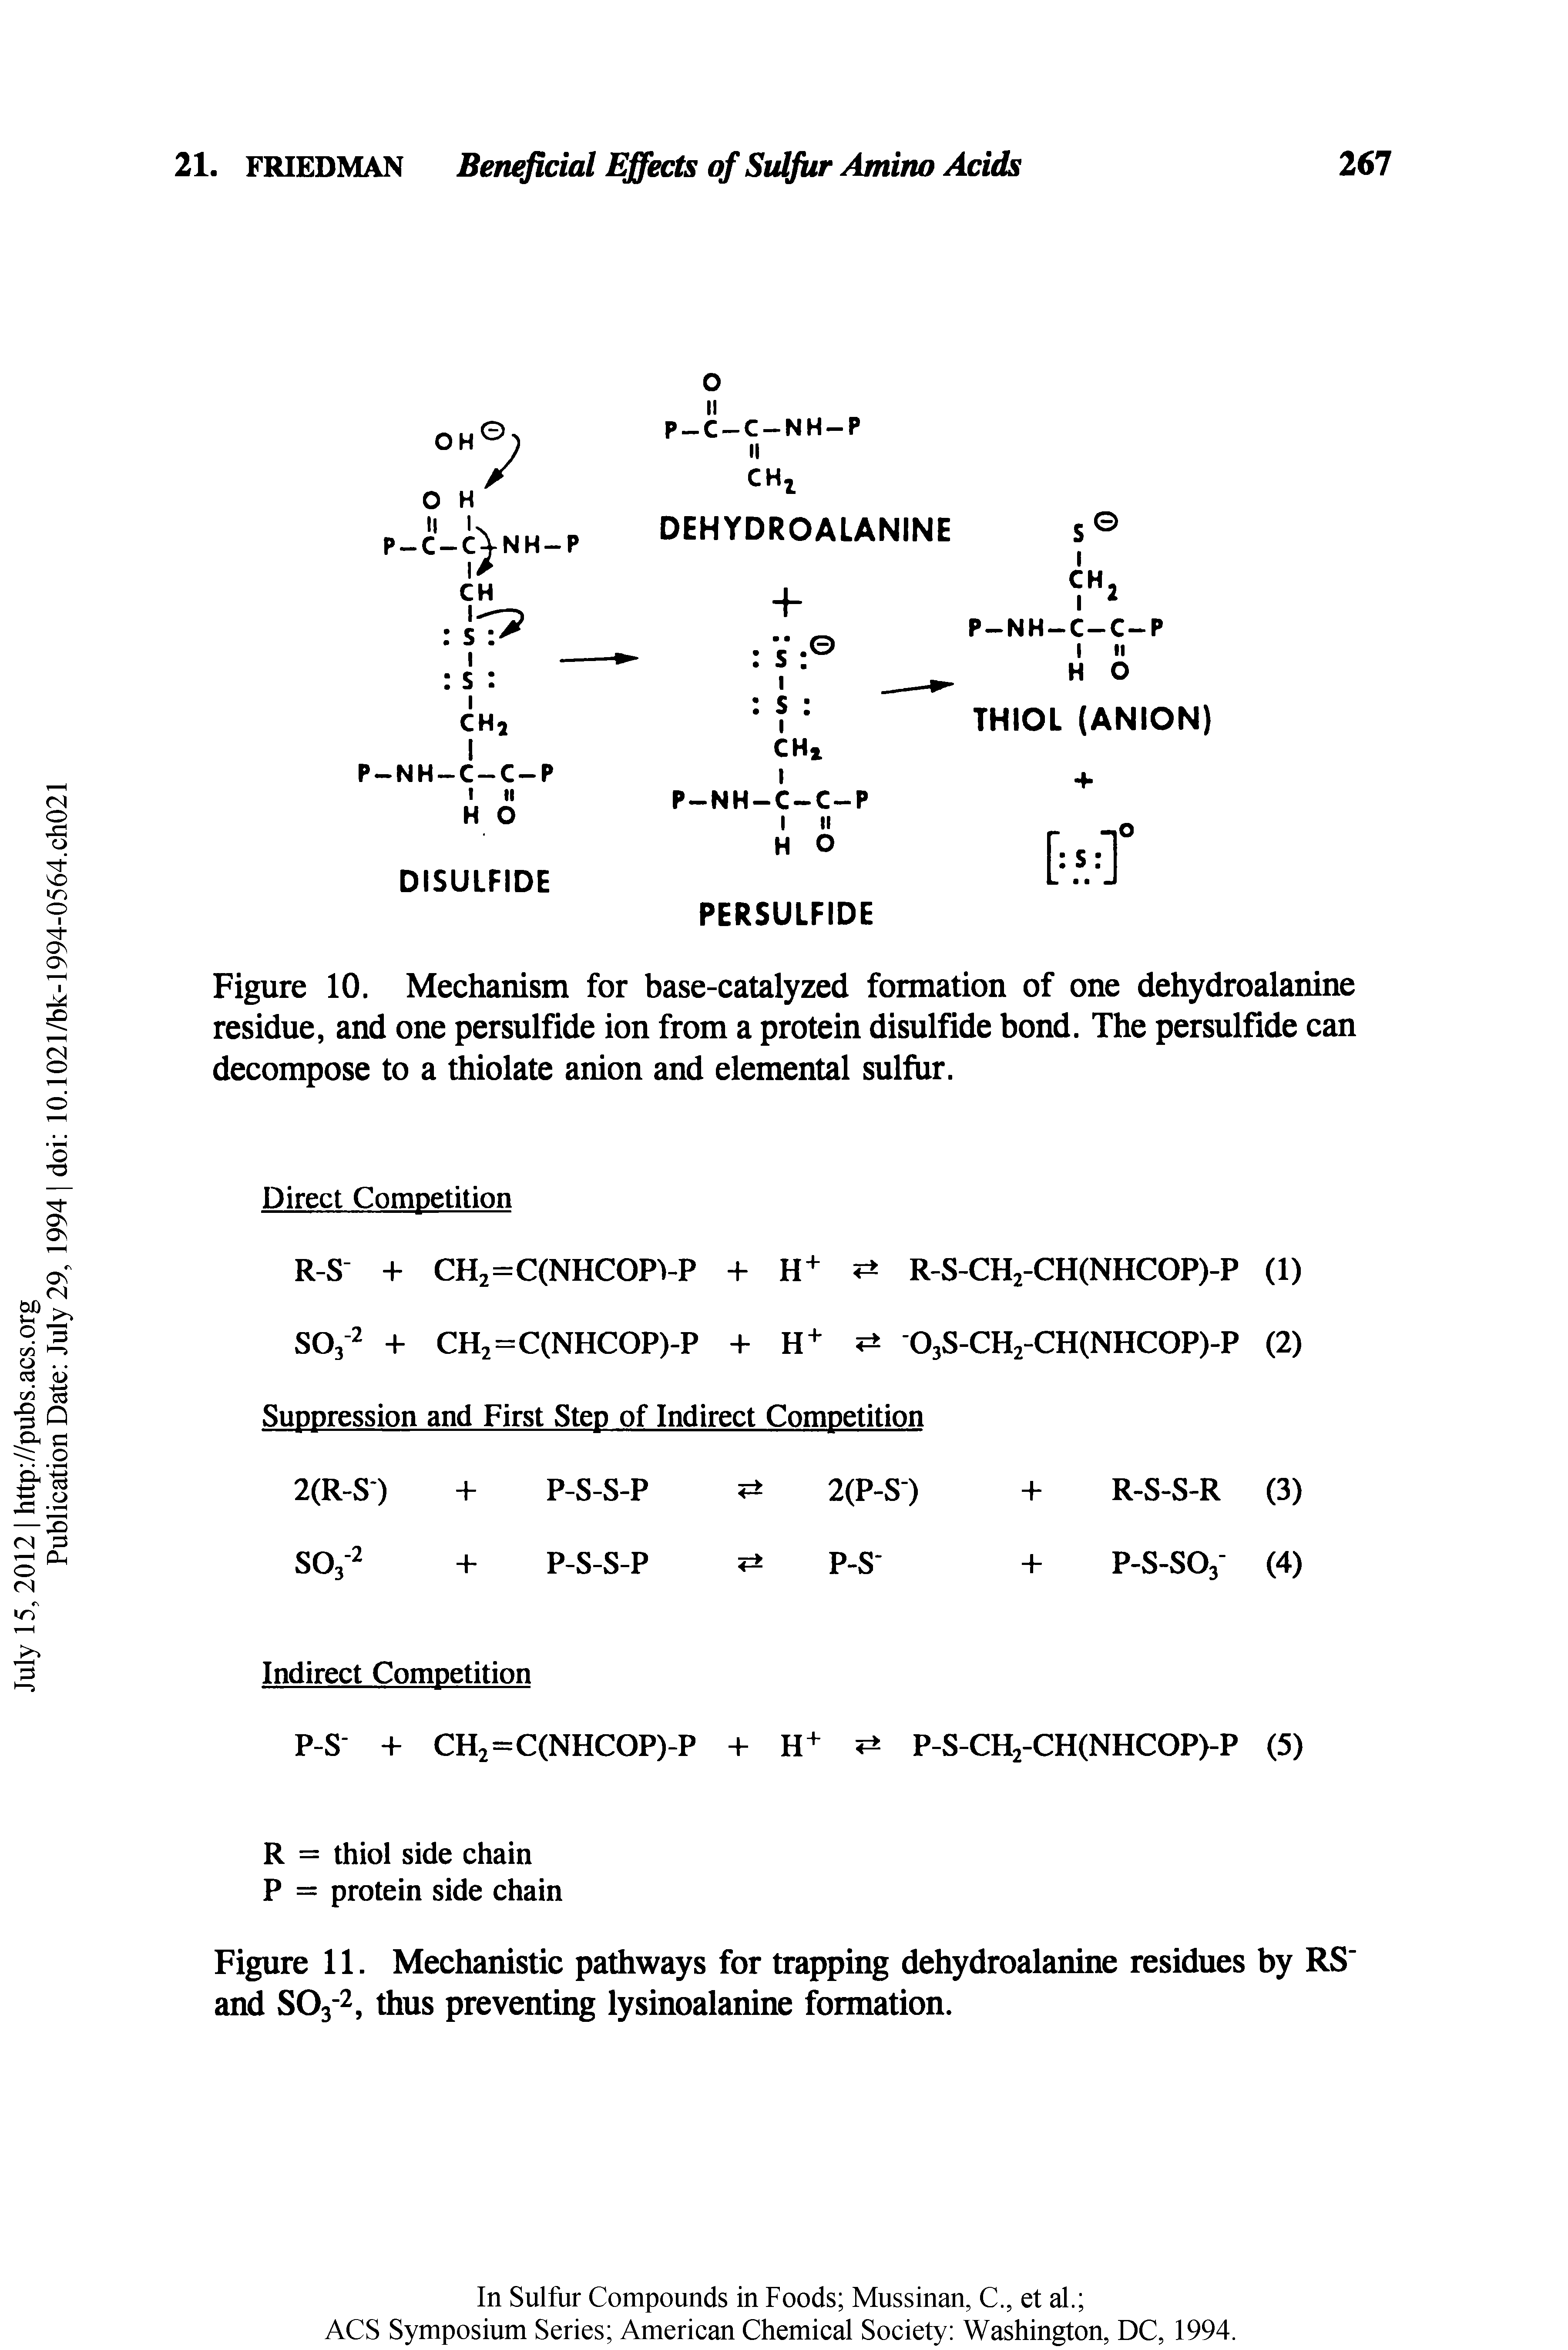 Figure 10. Mechanism for base-catalyzed formation of one dehydroalanine residue, and one persulfide ion from a protein disulfide bond. The persulfide can decompose to a thiolate anion and elemental sulfur.